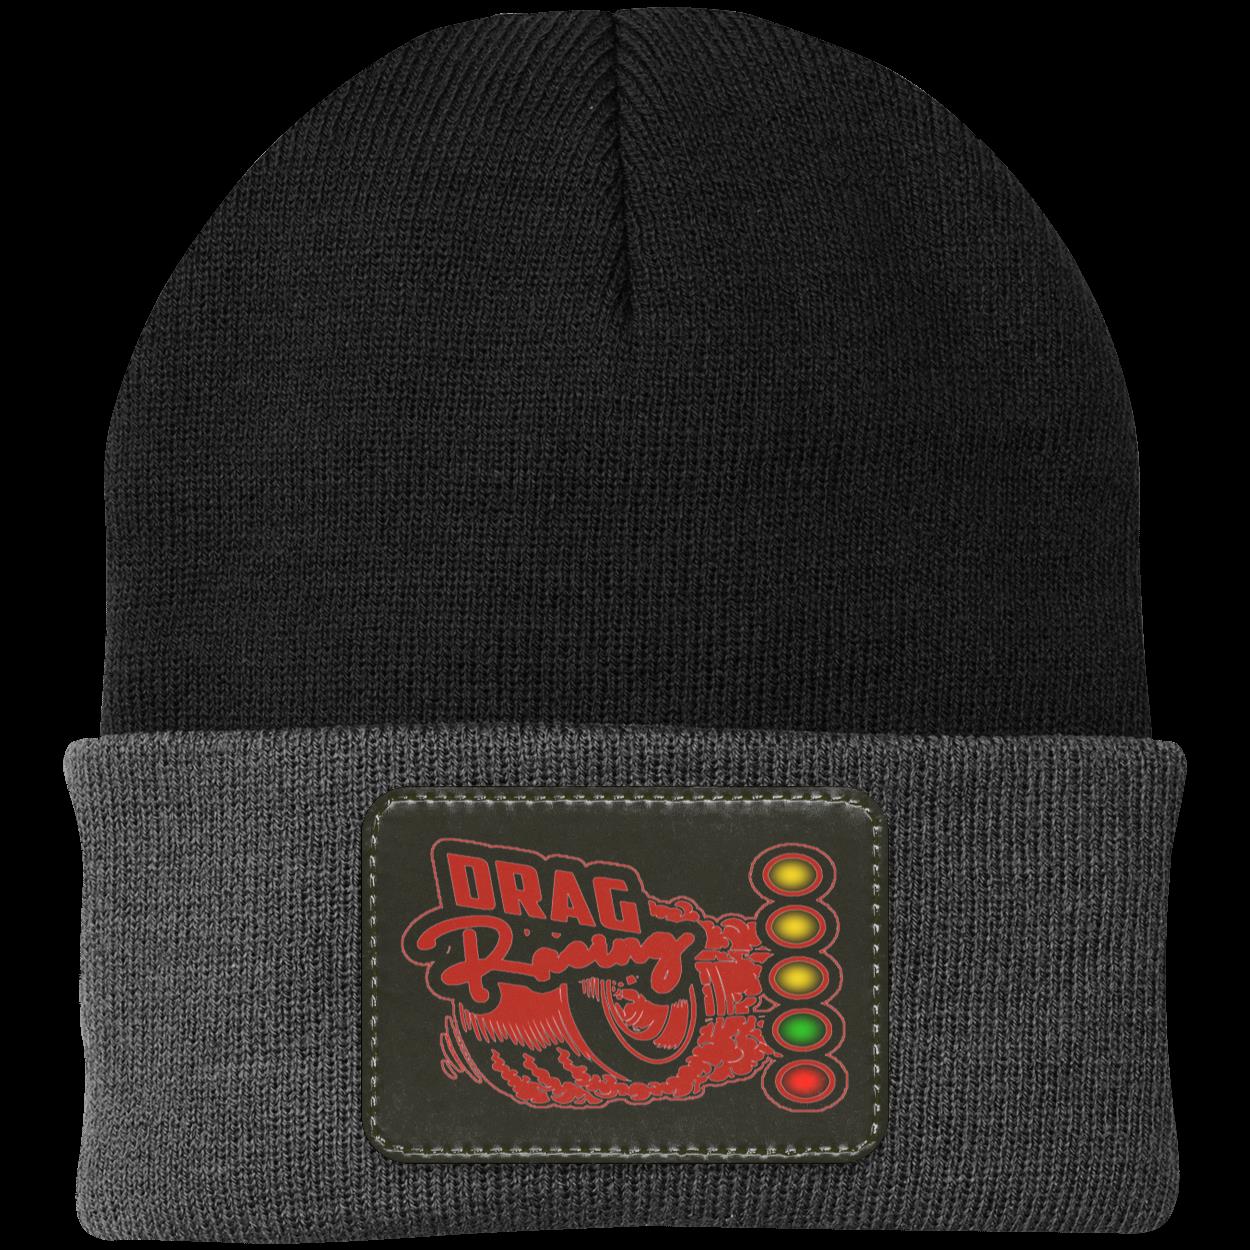 Drag Racing Patched Knit Cap V4